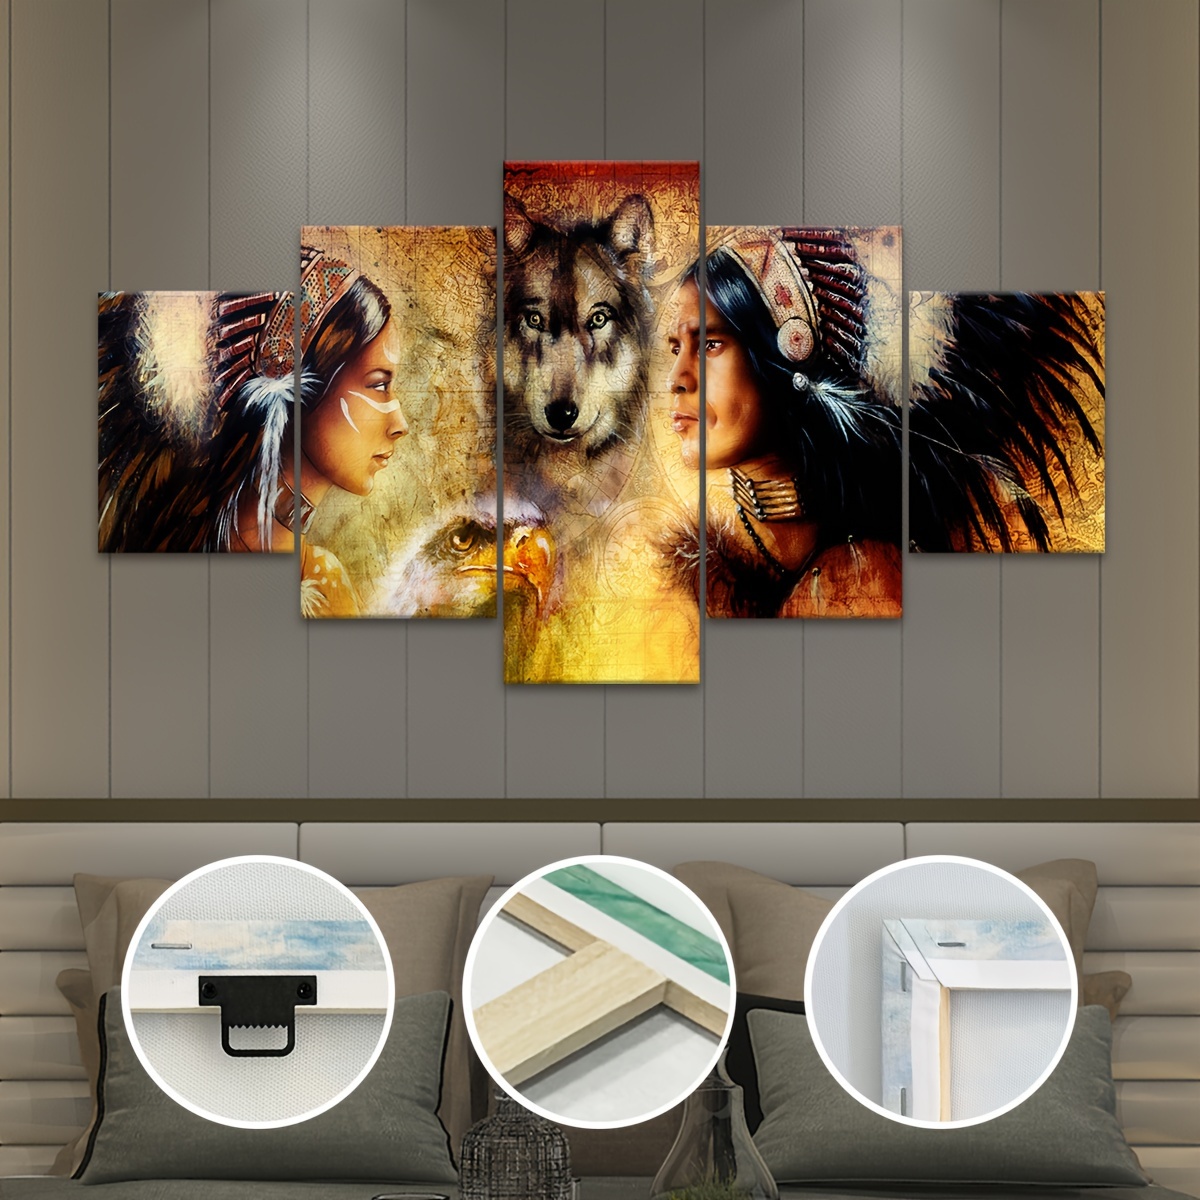 

5pcs/set Wooden Framed Canvas Poster, Modern Art, Native Americans And Wolves Canvas Poster, Ideal Gift For Bedroom Living Room Corridor, Wall Art, Wall Decor, Winter Decor, Room Decoration